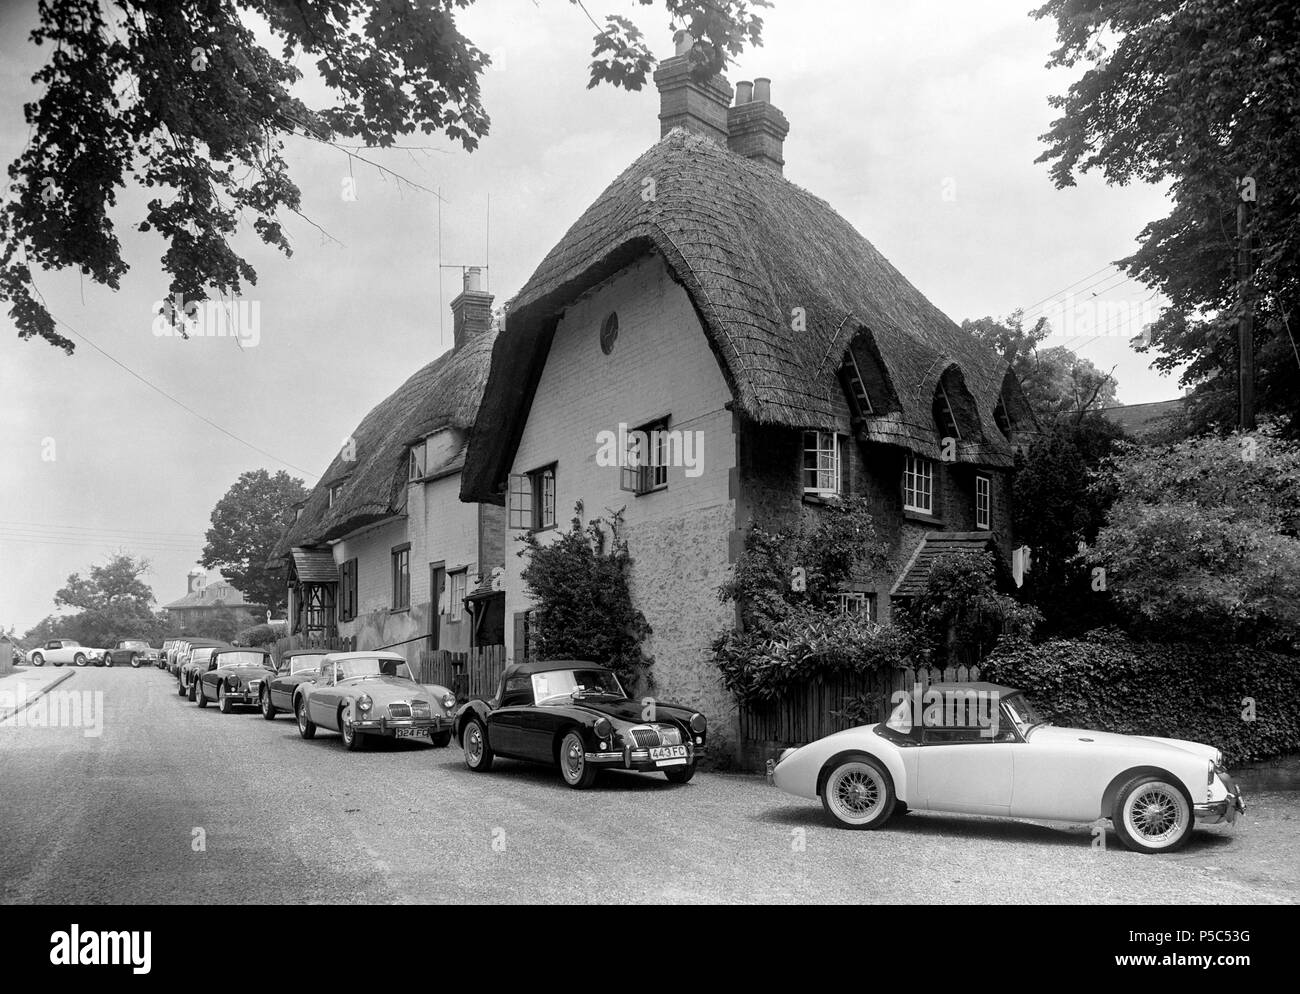 The old-world thatched roofs in the Oxfordshire village of Clifton Hampden contrast with the sleek modern lines of the MG sports cars passing through from the factory at Abingdon on their way to the docks, ready to be exported to the North American markets. Stock Photo